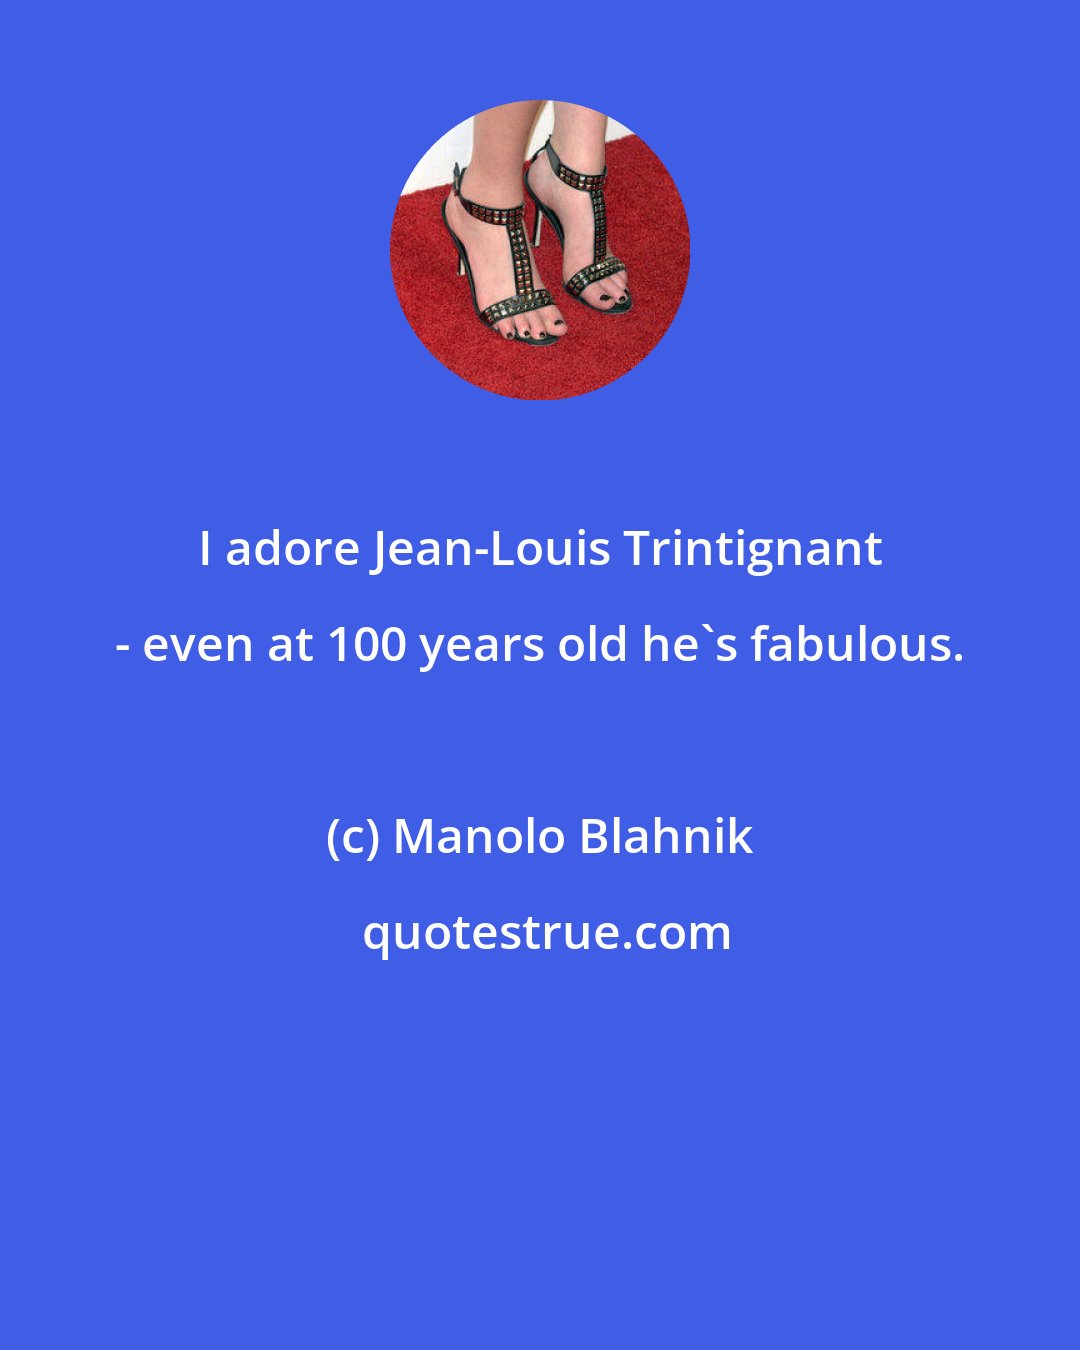 Manolo Blahnik: I adore Jean-Louis Trintignant - even at 100 years old he's fabulous.